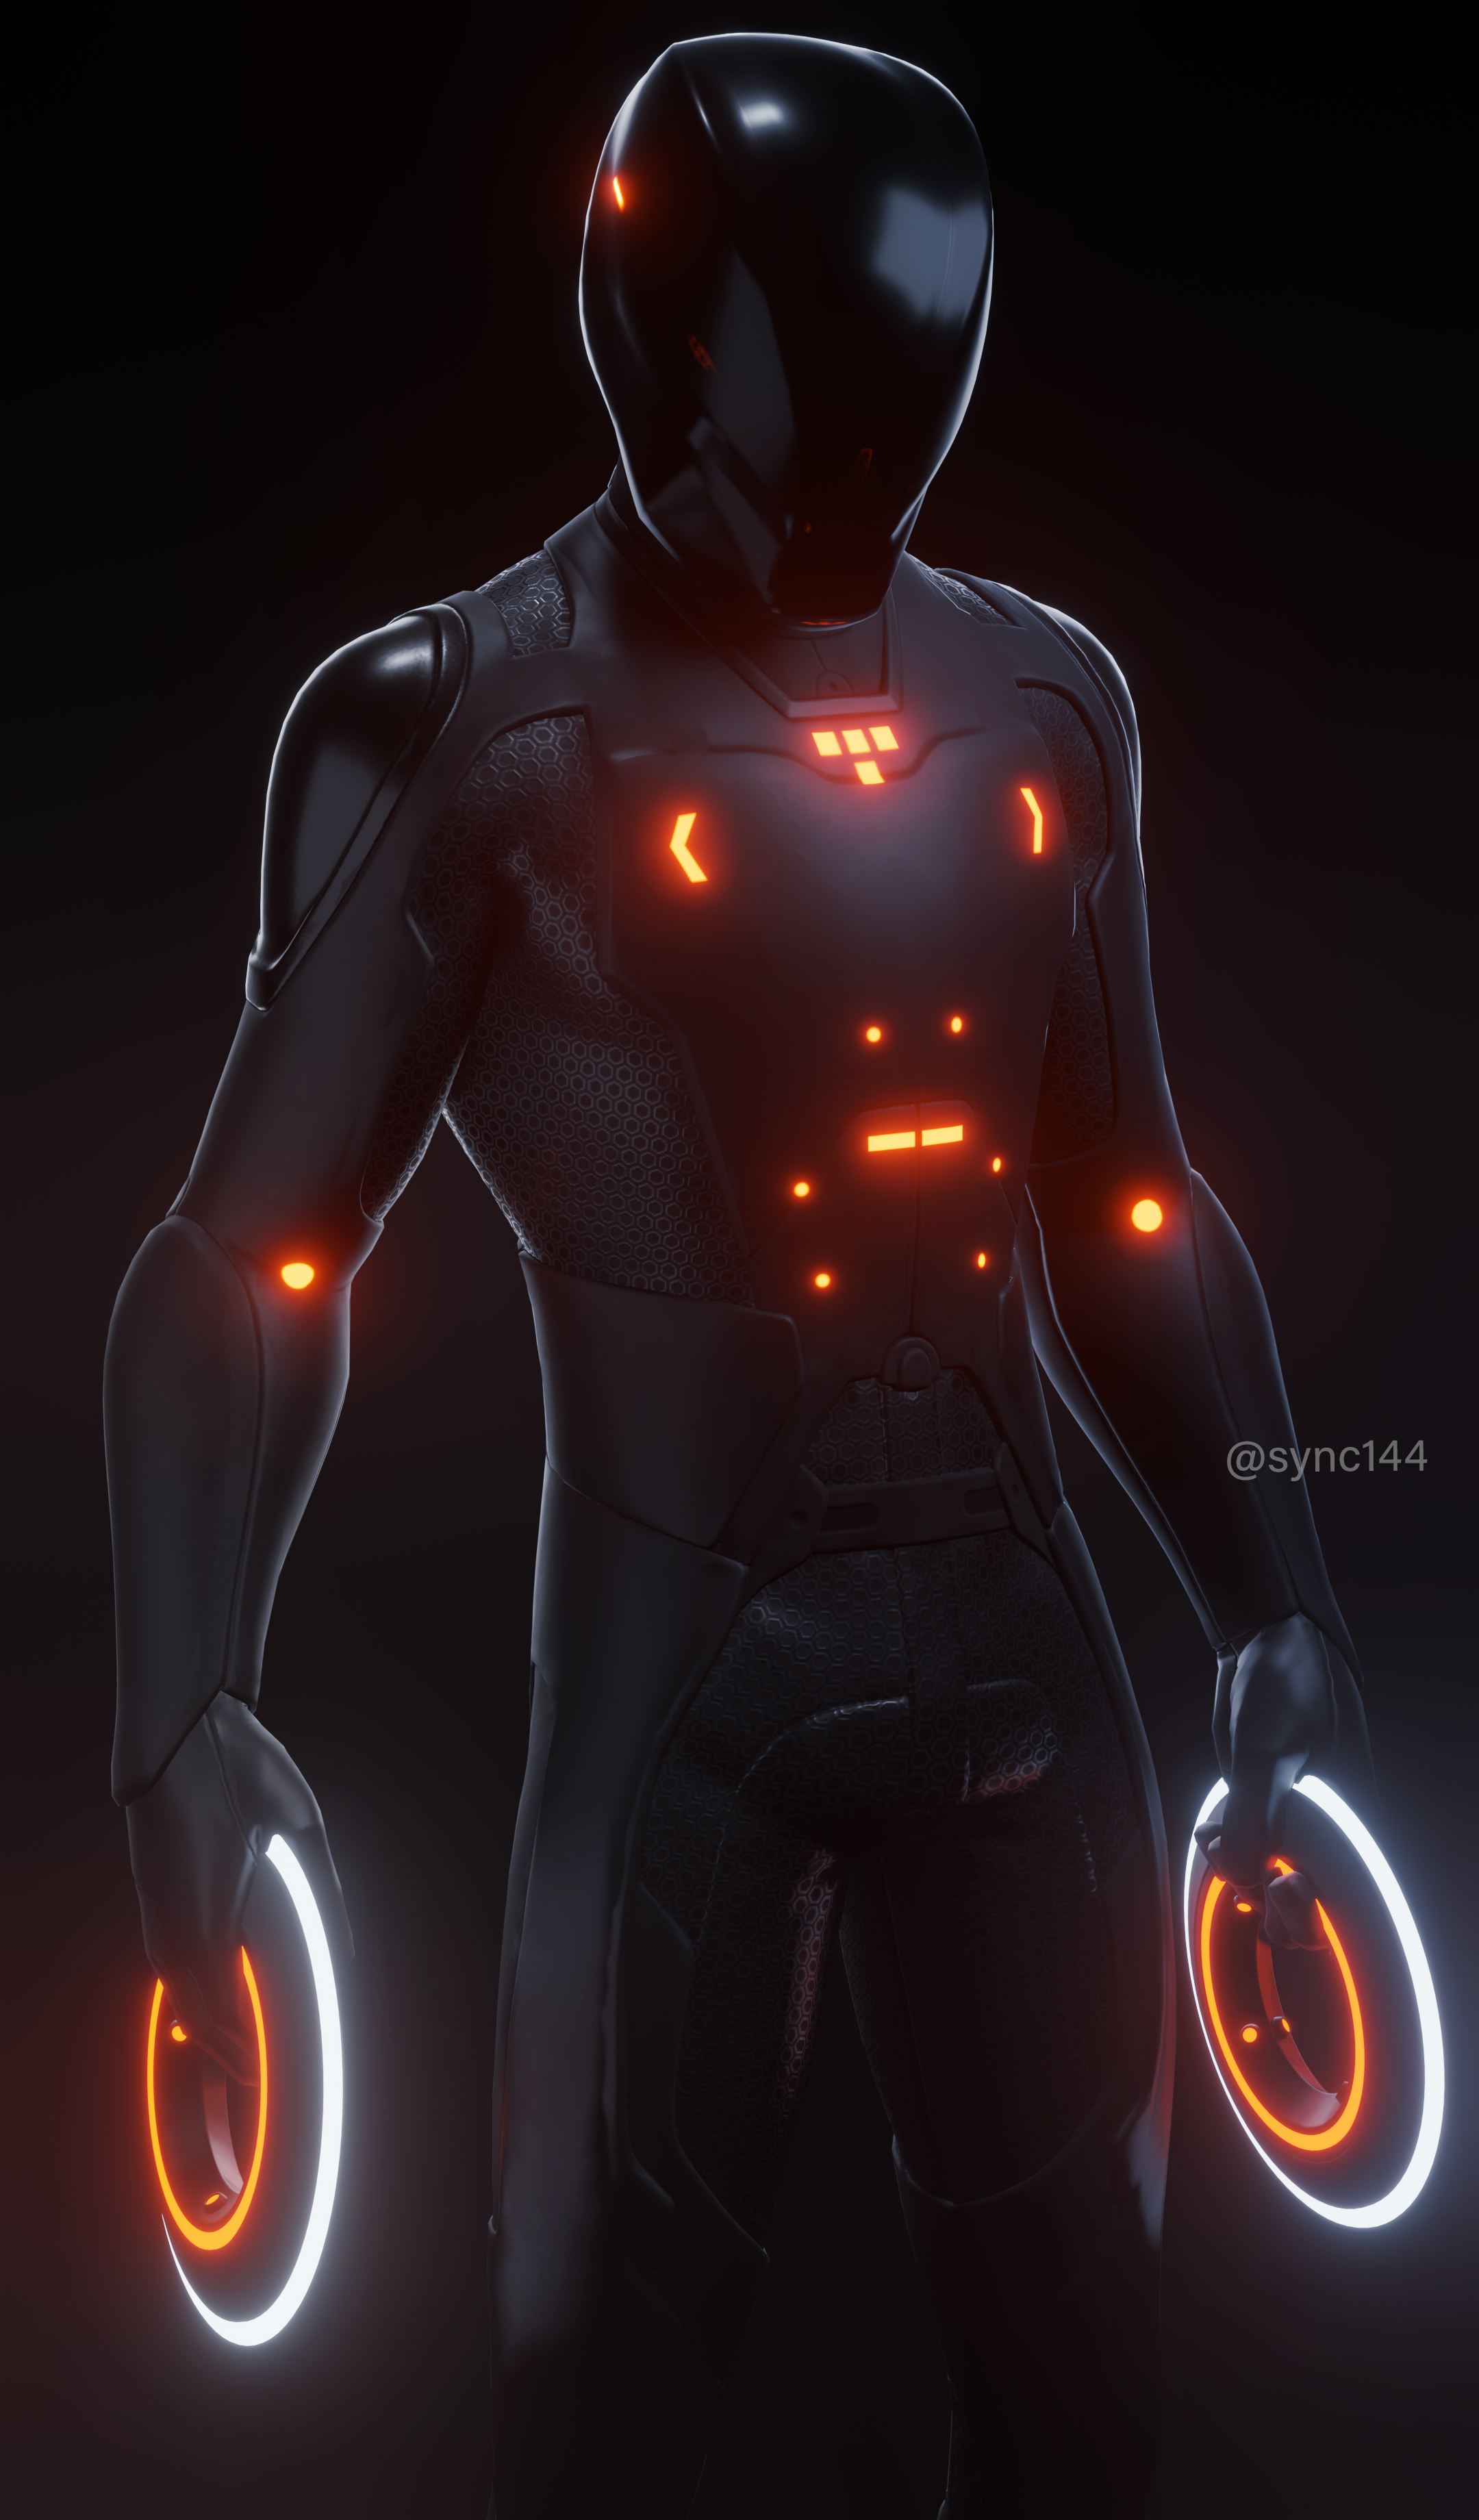 CONCEPT] Epic really missed out on adding Tron characters so 2160x3680